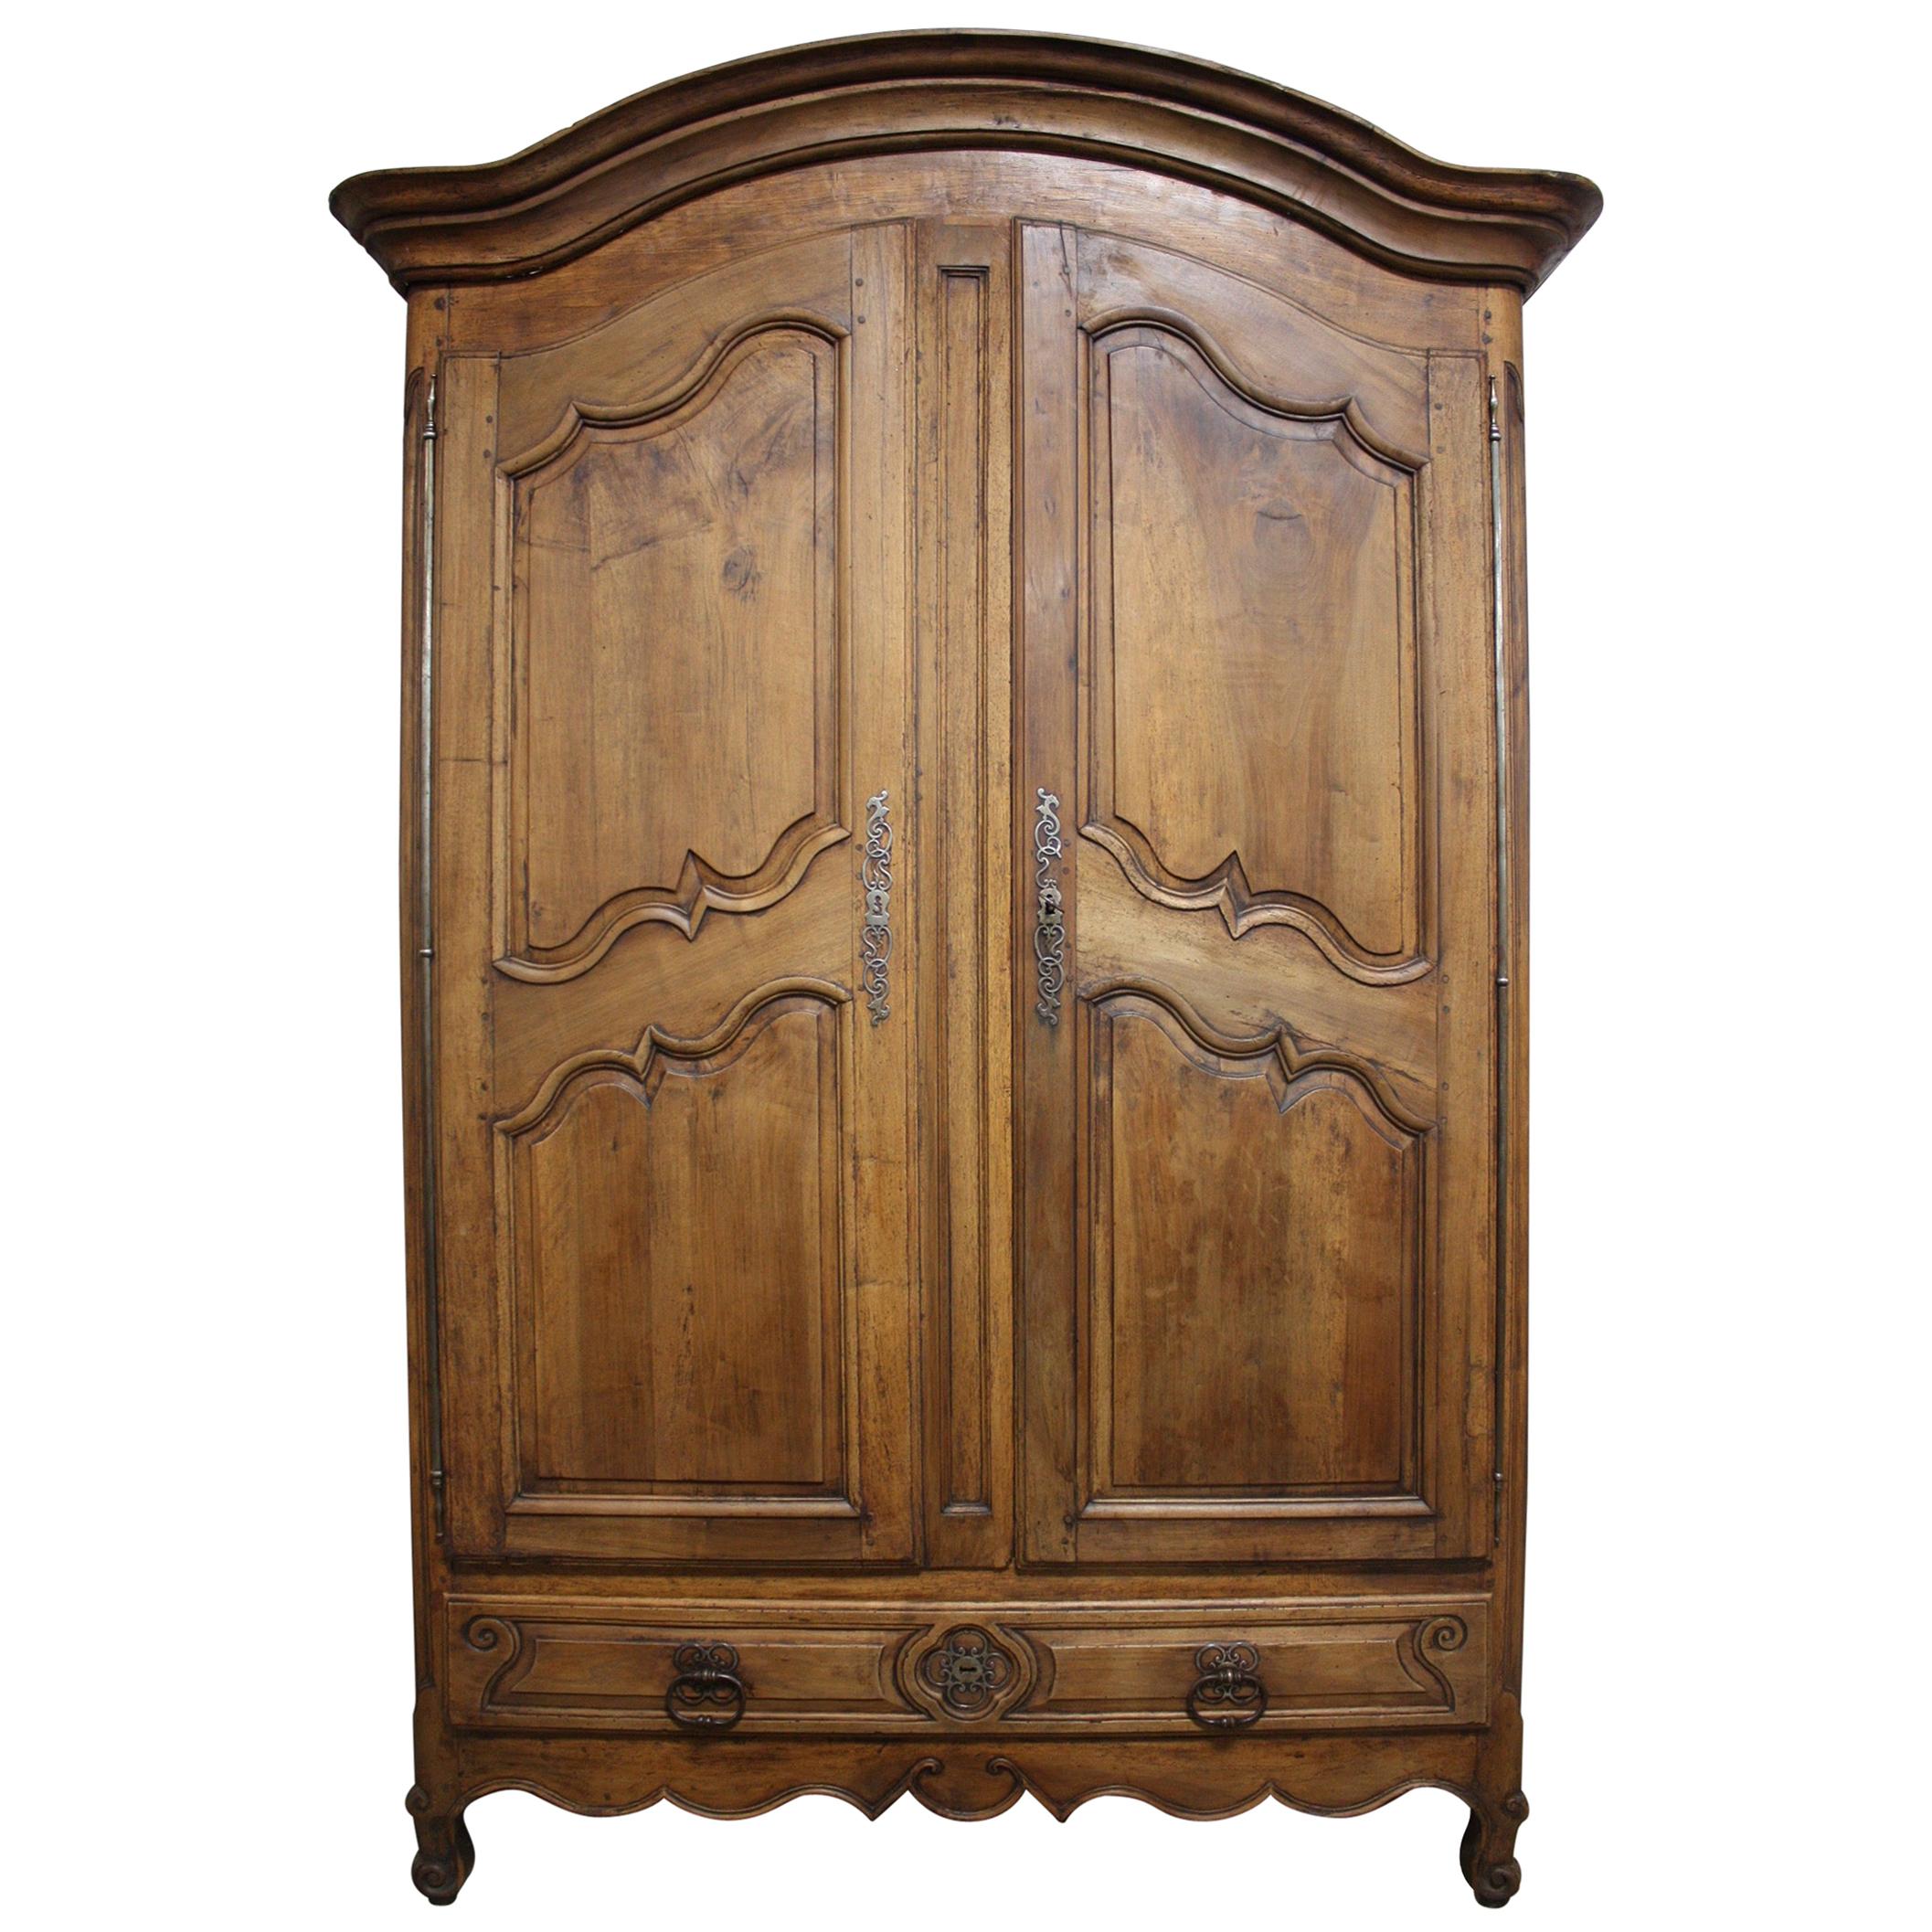 Magnificent Early 18th Century French Armoire